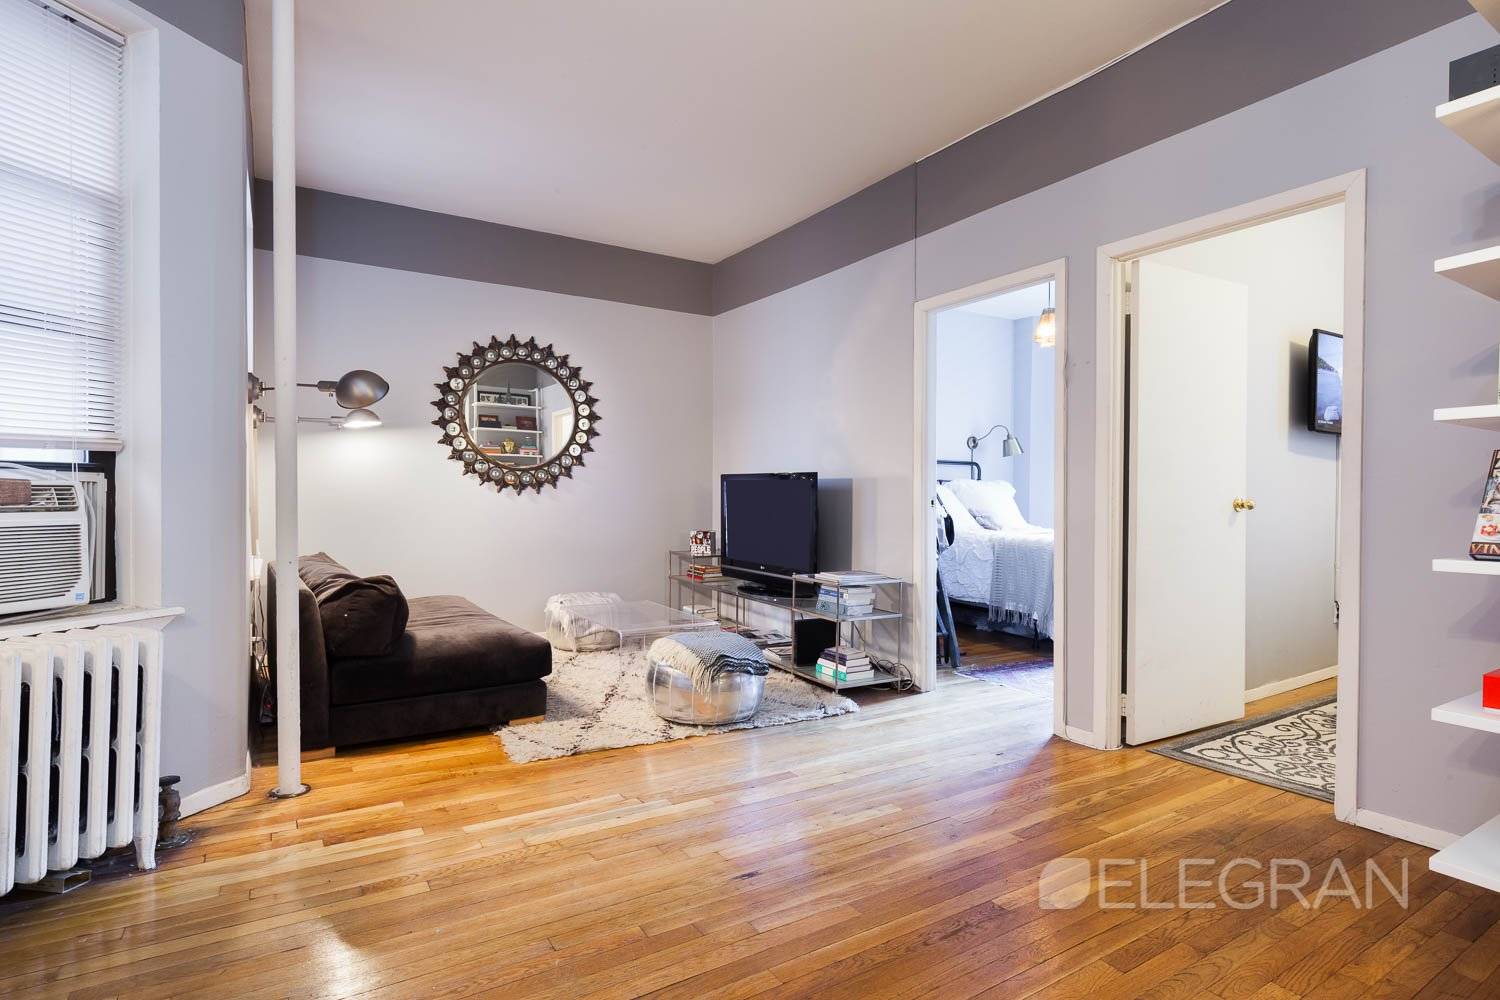 Gorgeous true 2 bedroom apartment in prime Murray Hill Kips Bay location.